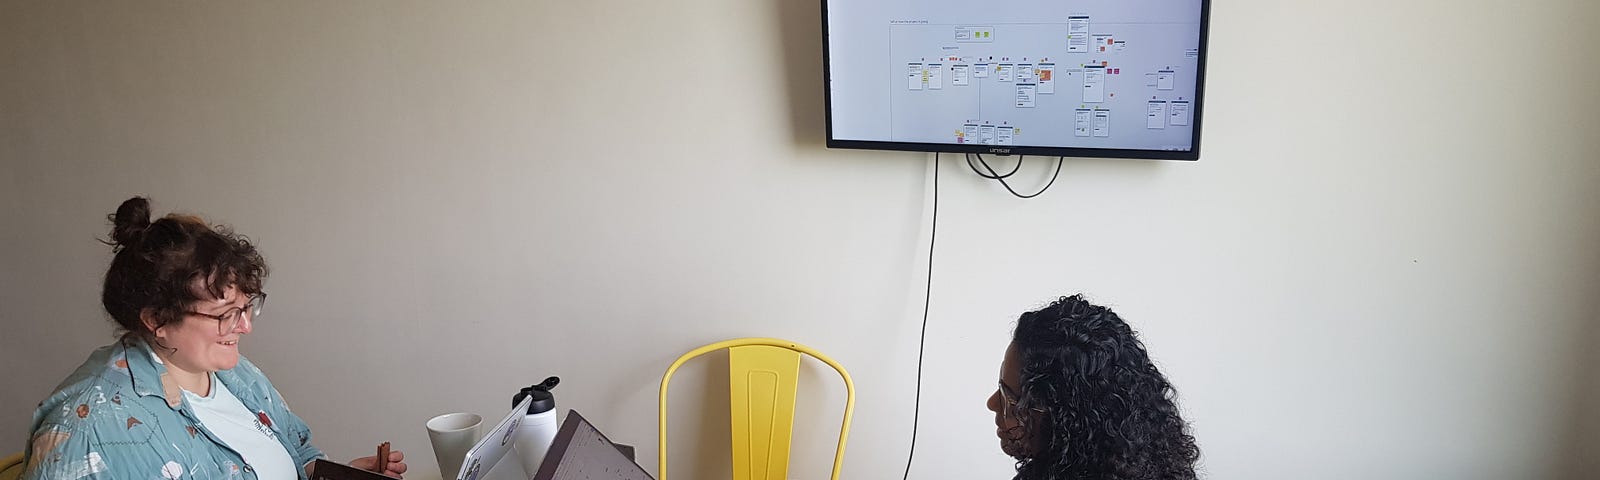 A picture of our work setup. There is a table with 3 laptops on it; 2 people are sat around the table working on their laptops. On the wall there is a tv screen, which is presenting images from one of the laptops.